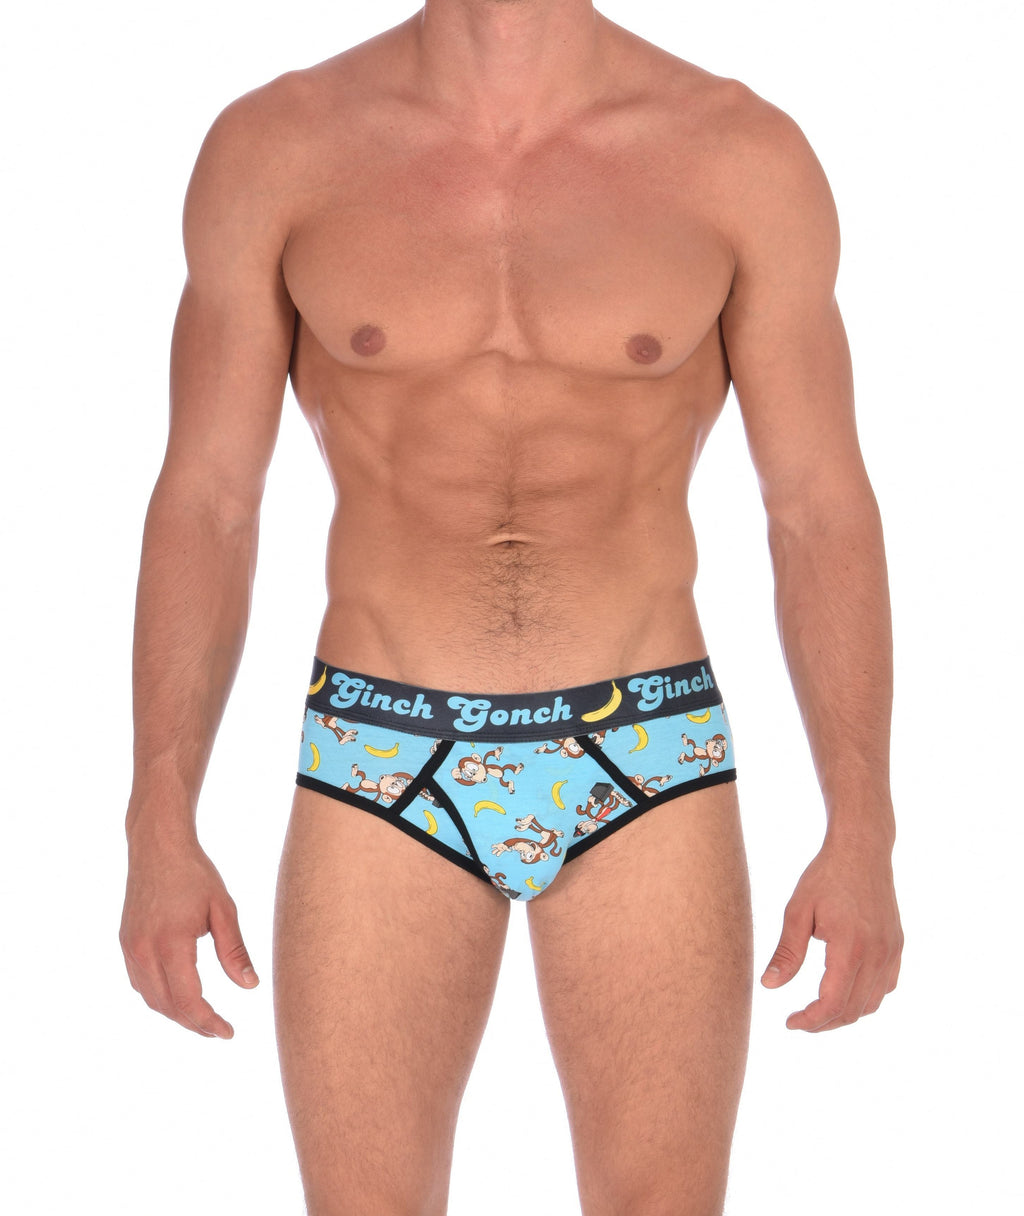 Ginch Gonch Monkey Business Men's Underwear Brief with blue background, monkeys, and bananas. Black trim and printed waistband with Ginch Gonch and bananas. Front